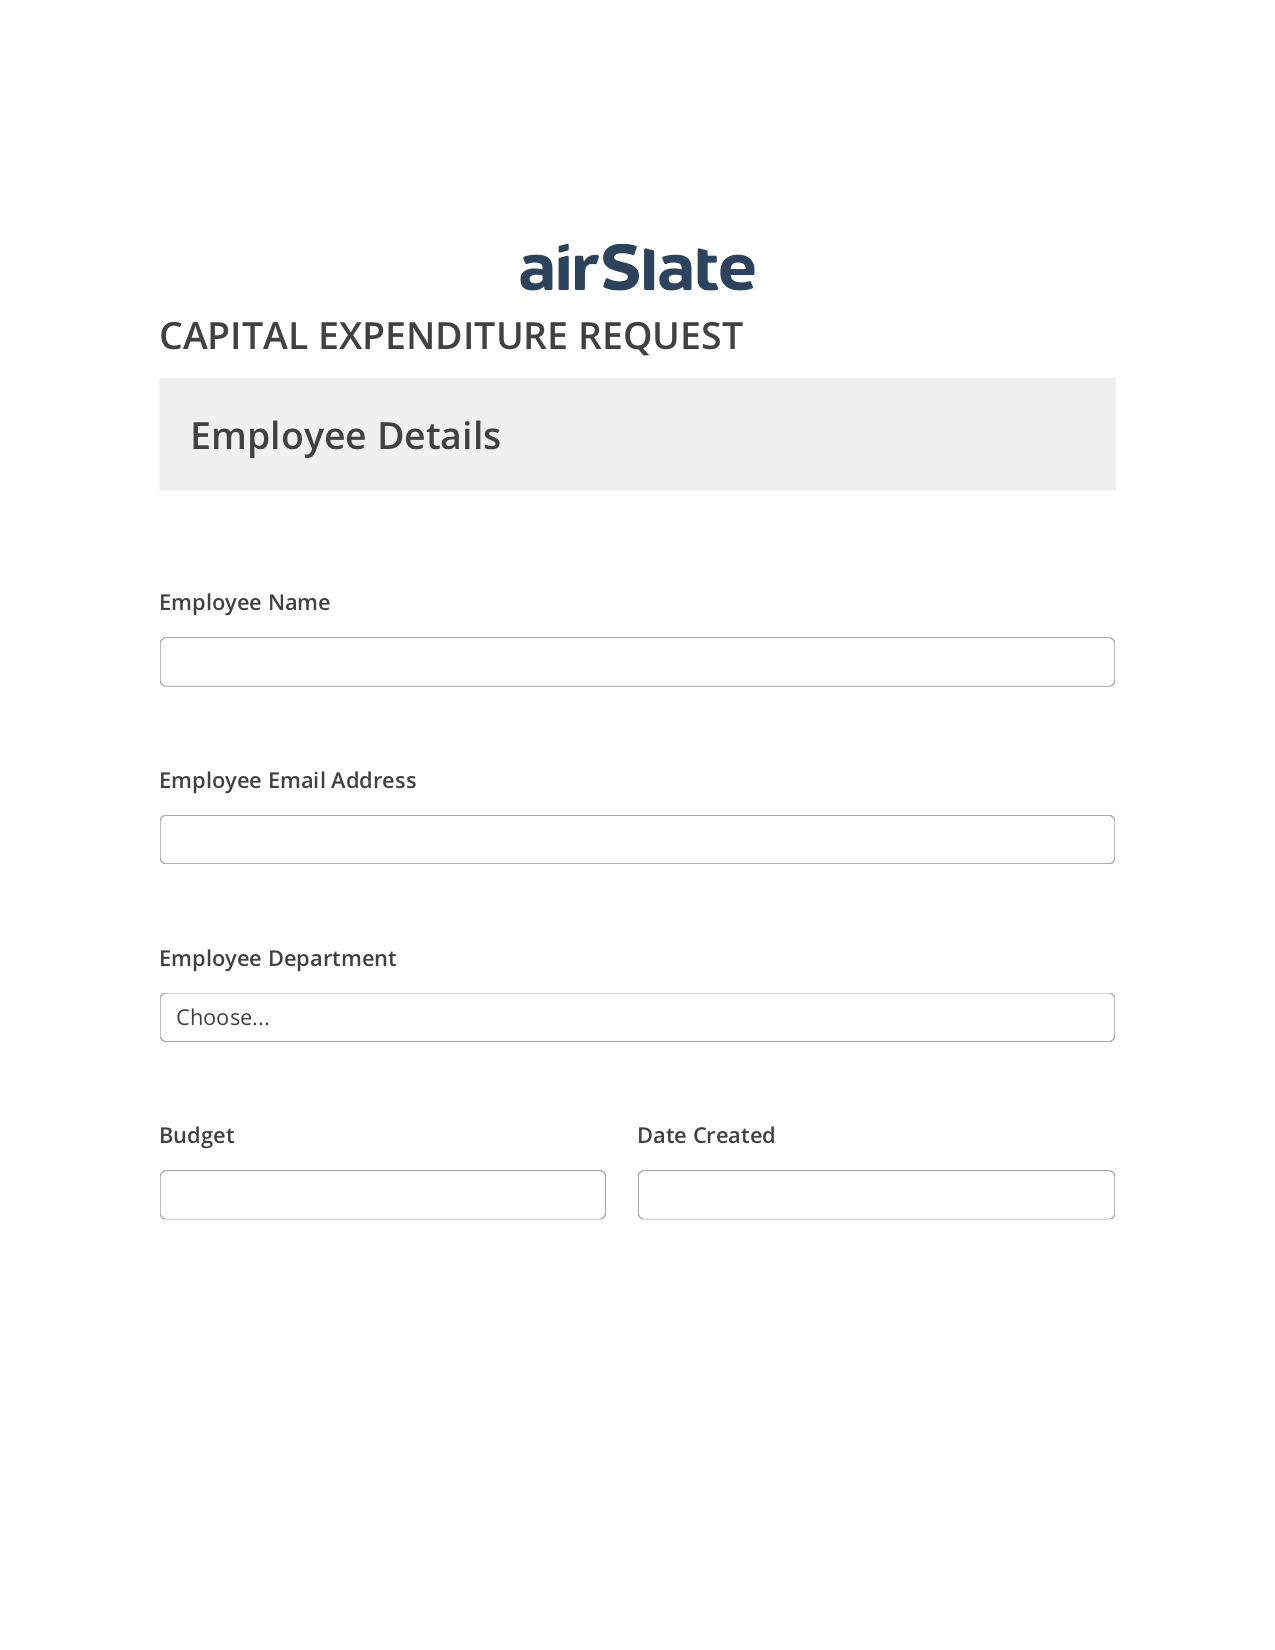 Capital Expenditure Request Approval Workflow Pre-fill from CSV File Bot, Mailchimp send Campaign bot, Email Notification Postfinish Bot